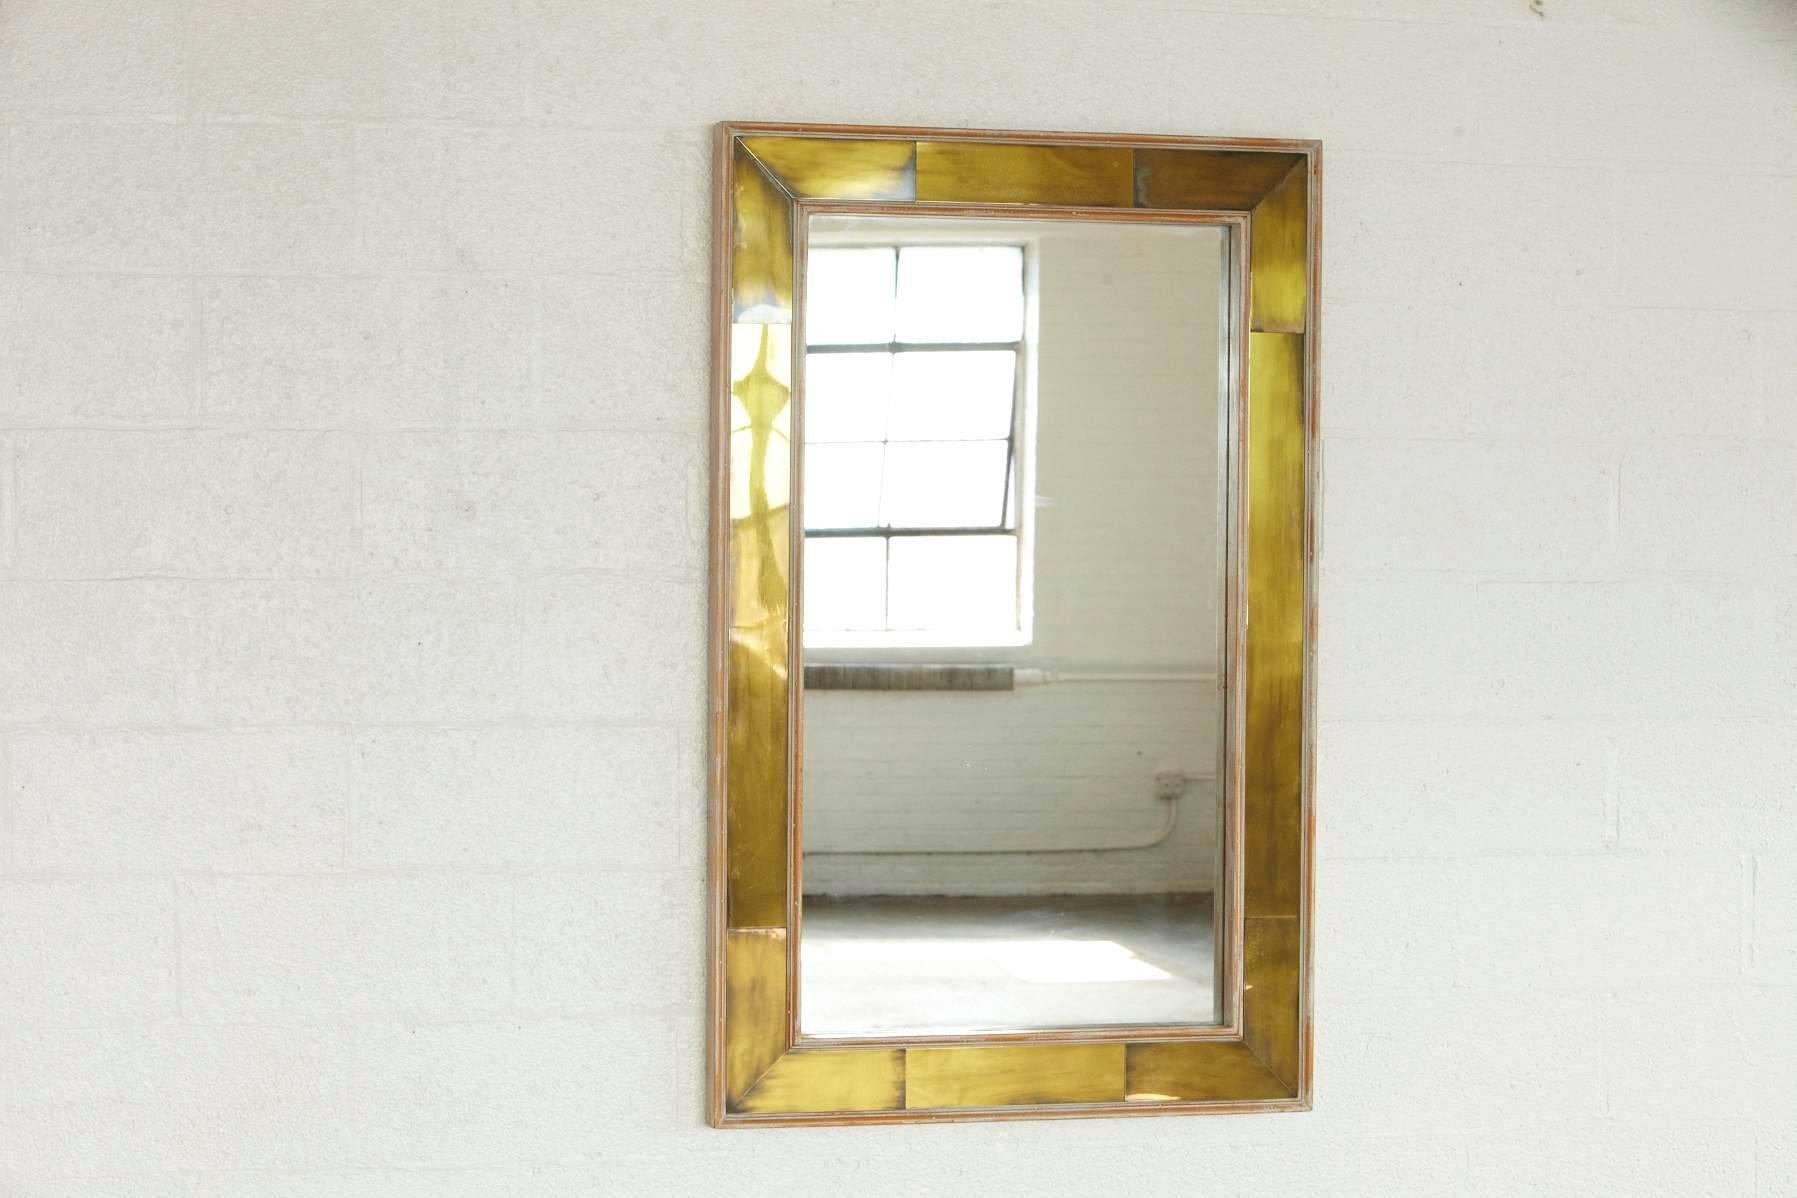 Stylish rectangular, modern wall mirror with polished brass inlays in a white washed wood frame.